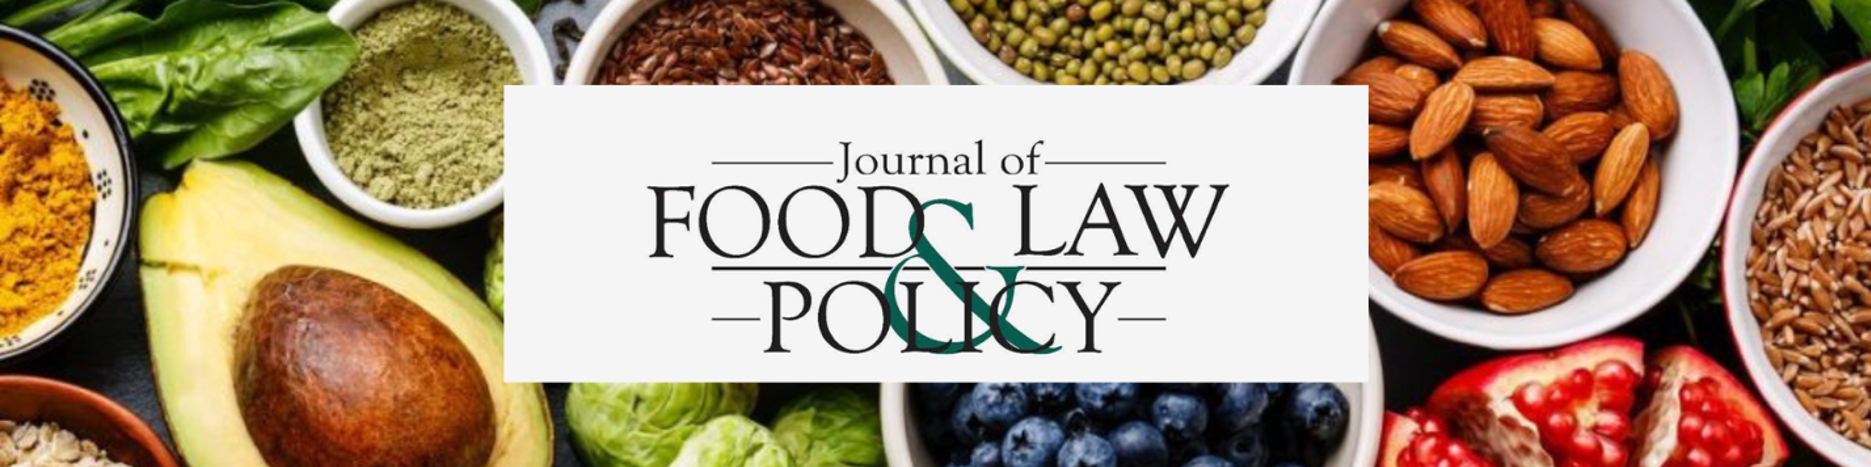 About the Journal of Food Law & Policy